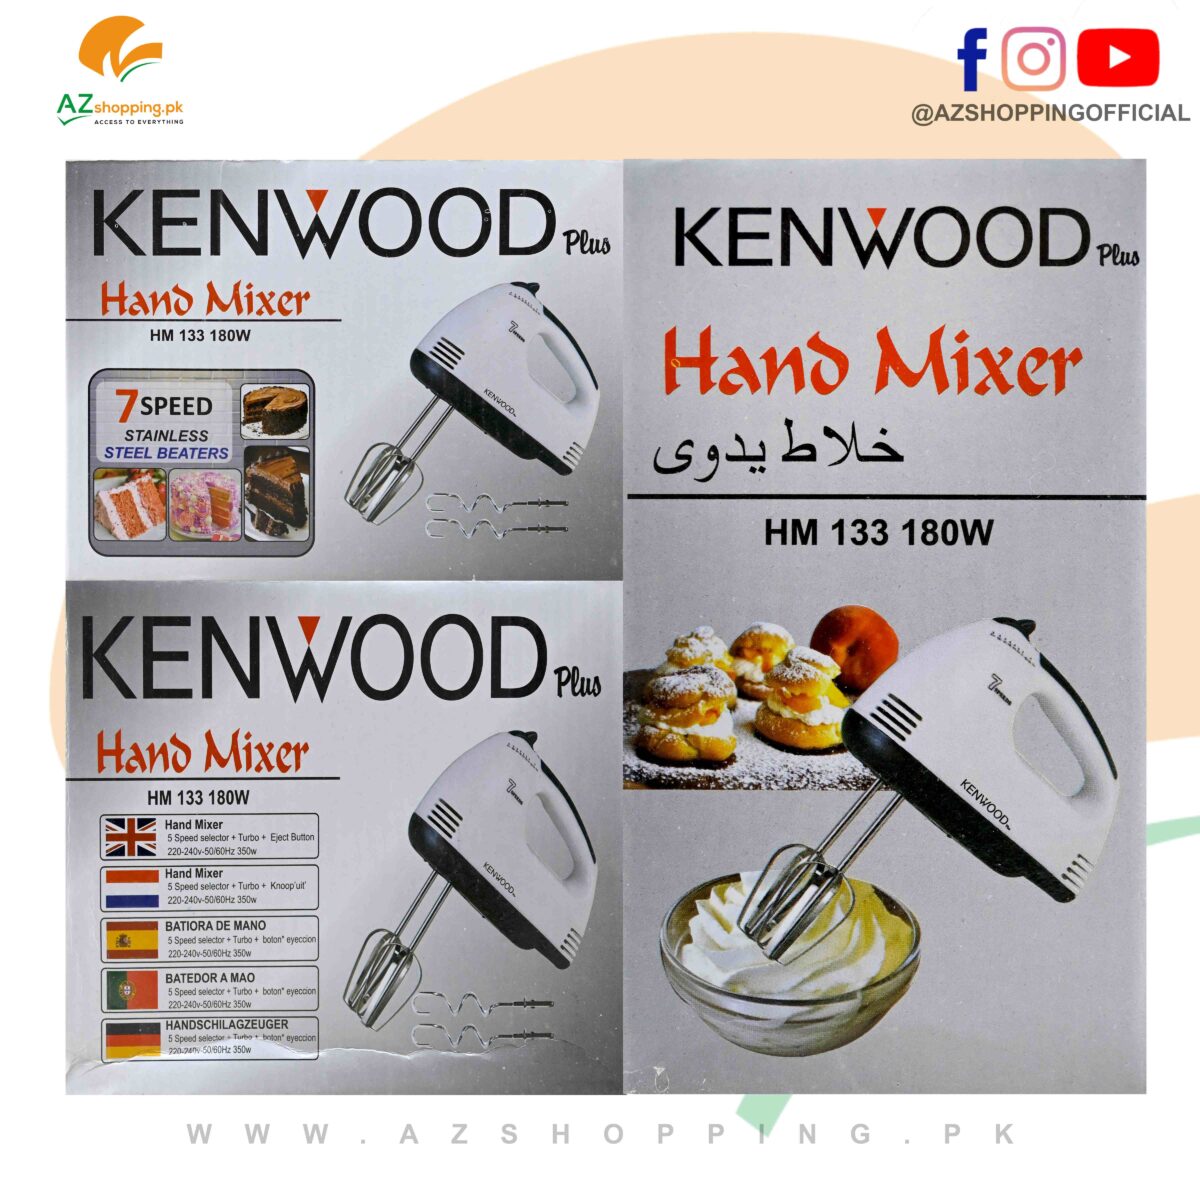 KENWOOD plus – Hand Mixer with 7-speed stainless steel beaters 180W – Model HM-133